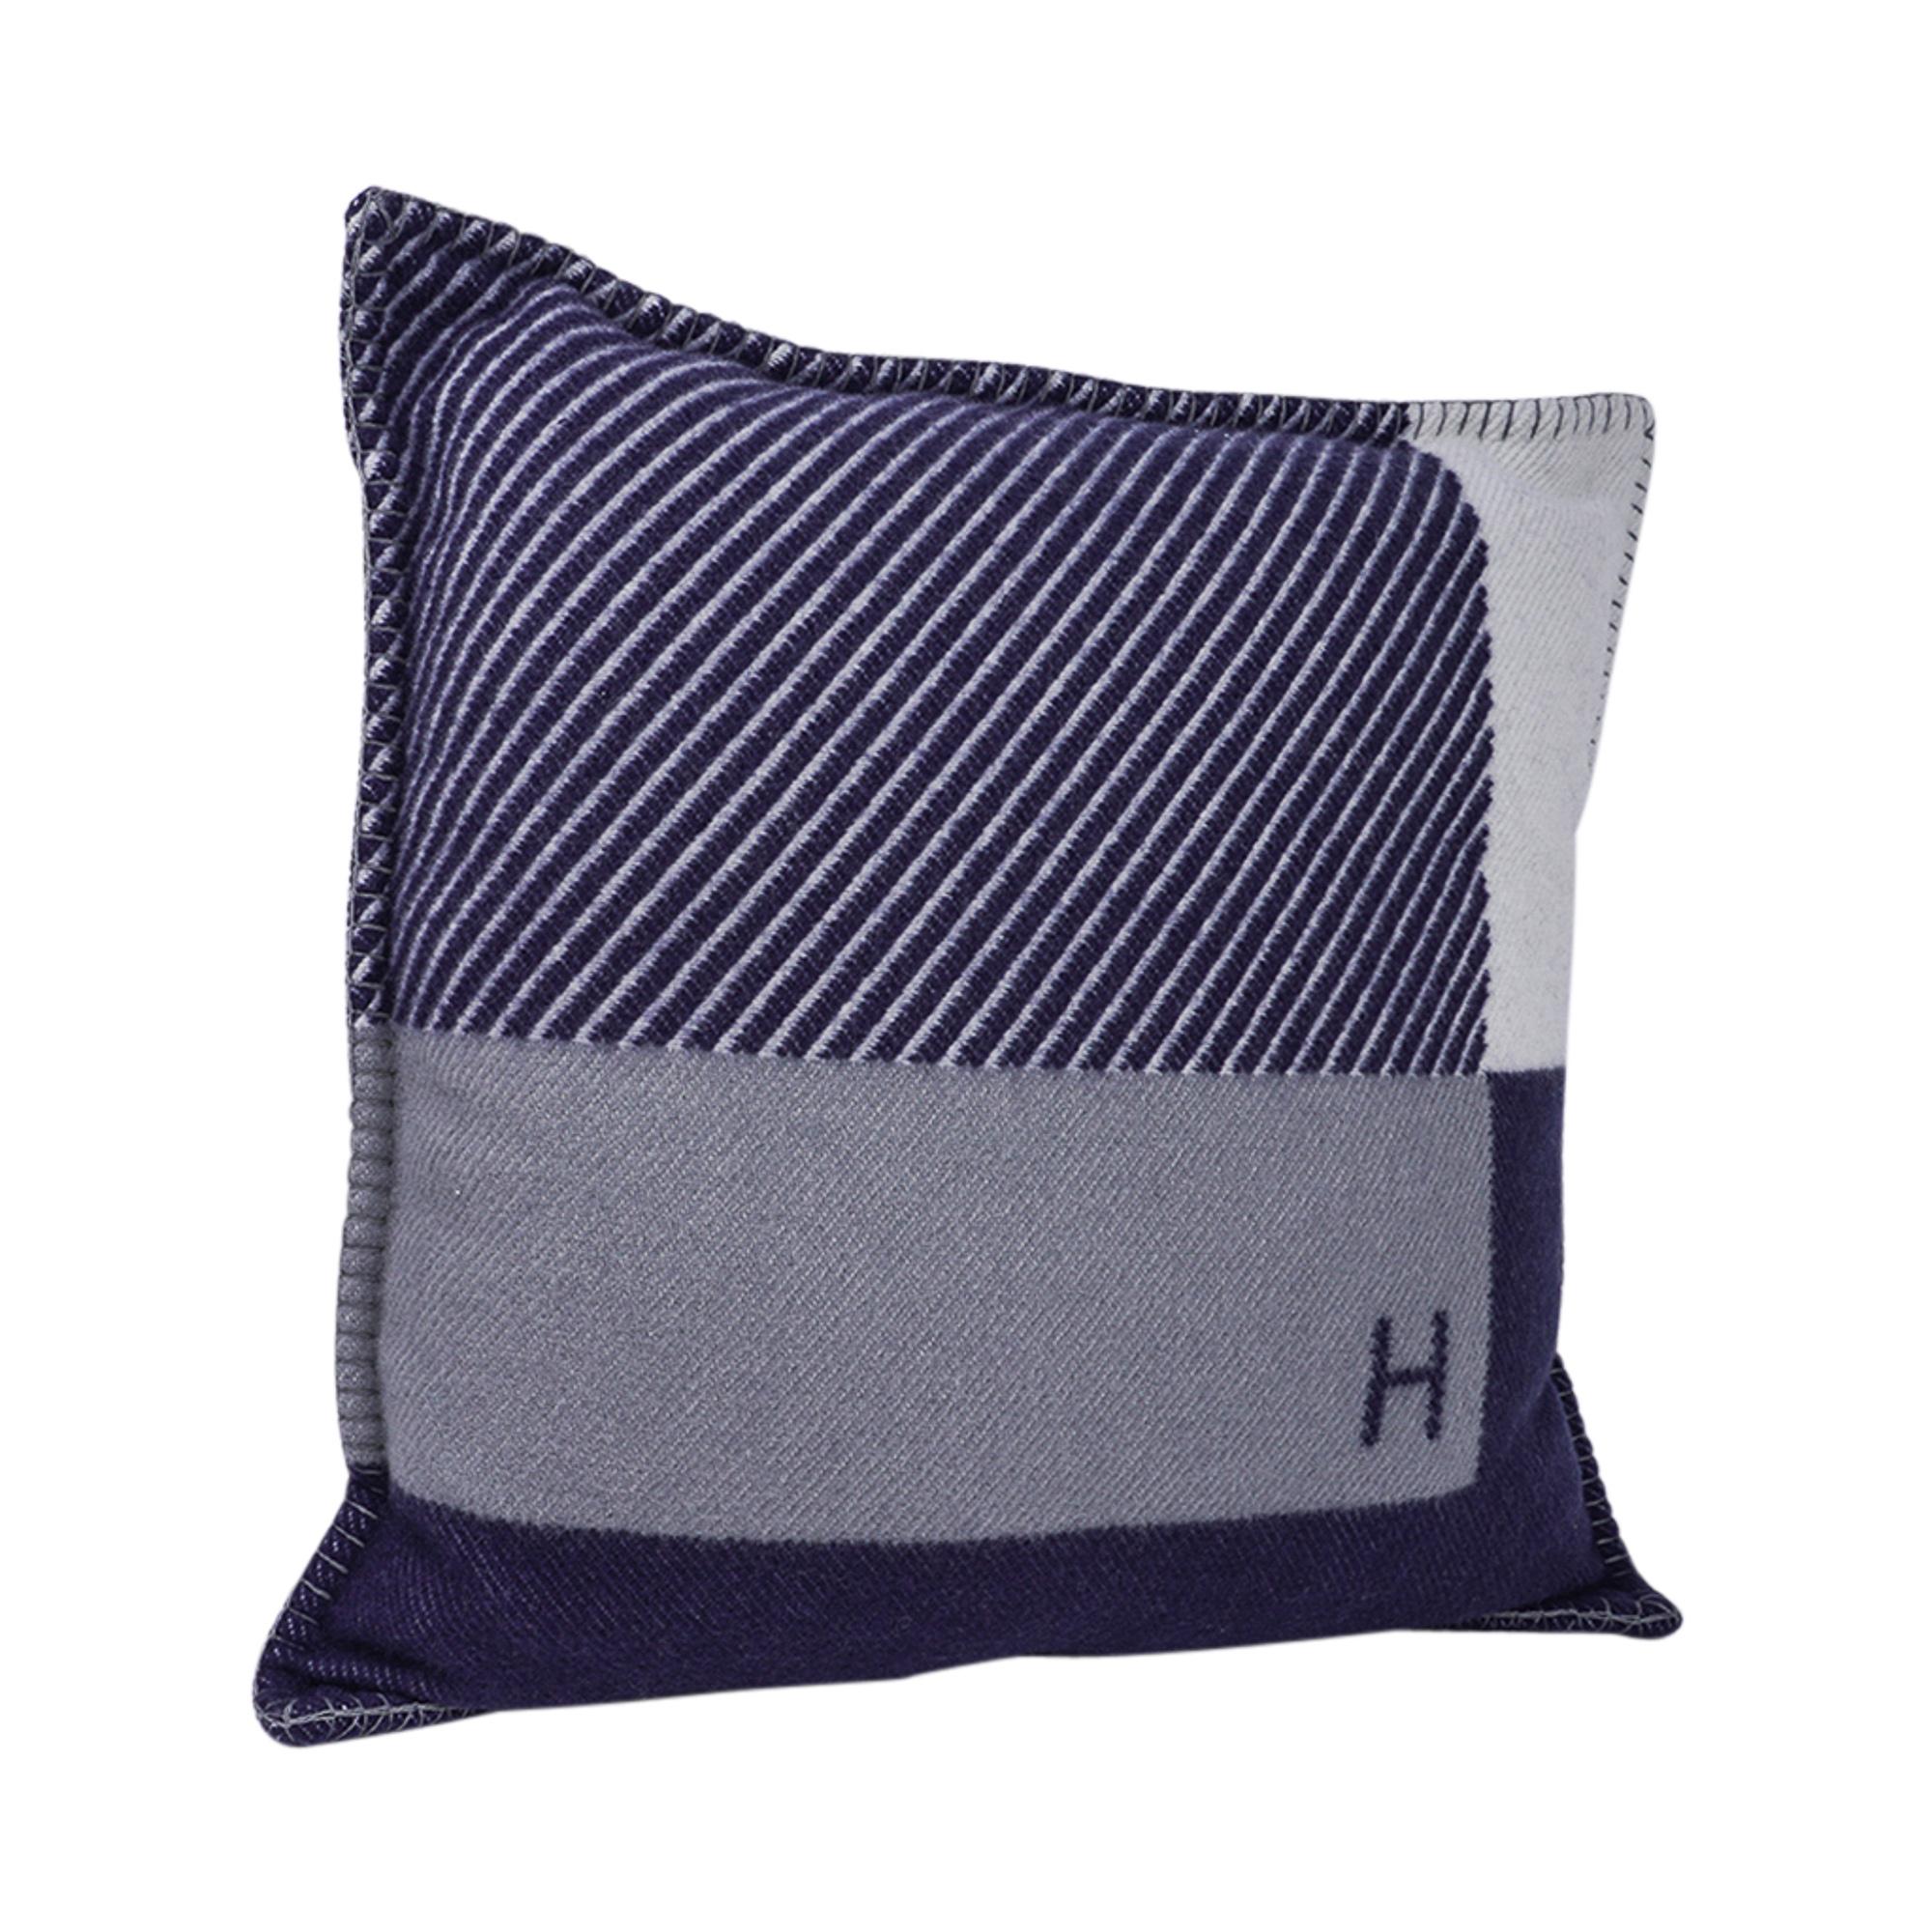 Mightychic offers an Hermes pillow H Riviera featured in Marine.
Designed by Hermes Studio the name invokes the beginning of sunbathing in the 1930s.
The removable cover is created from 90% Wool and 10% cashmere and has blanket stitch edges.
Comes